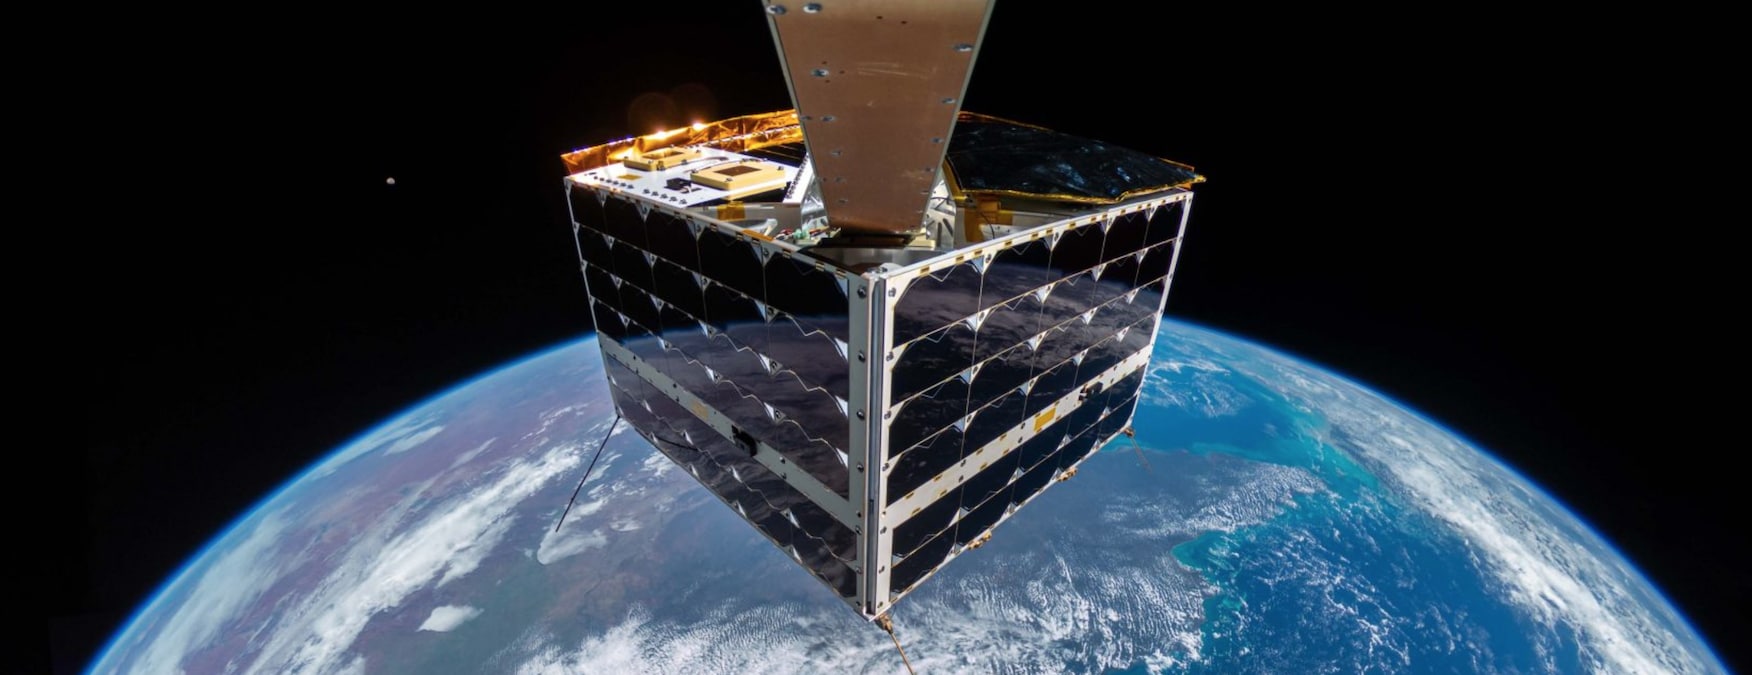 NanoAvionics used a GoPro Hero 7 mounted on a selfie stick to take the first-ever 4K resolution full satellite selfie in space with an immersive view of Earth.